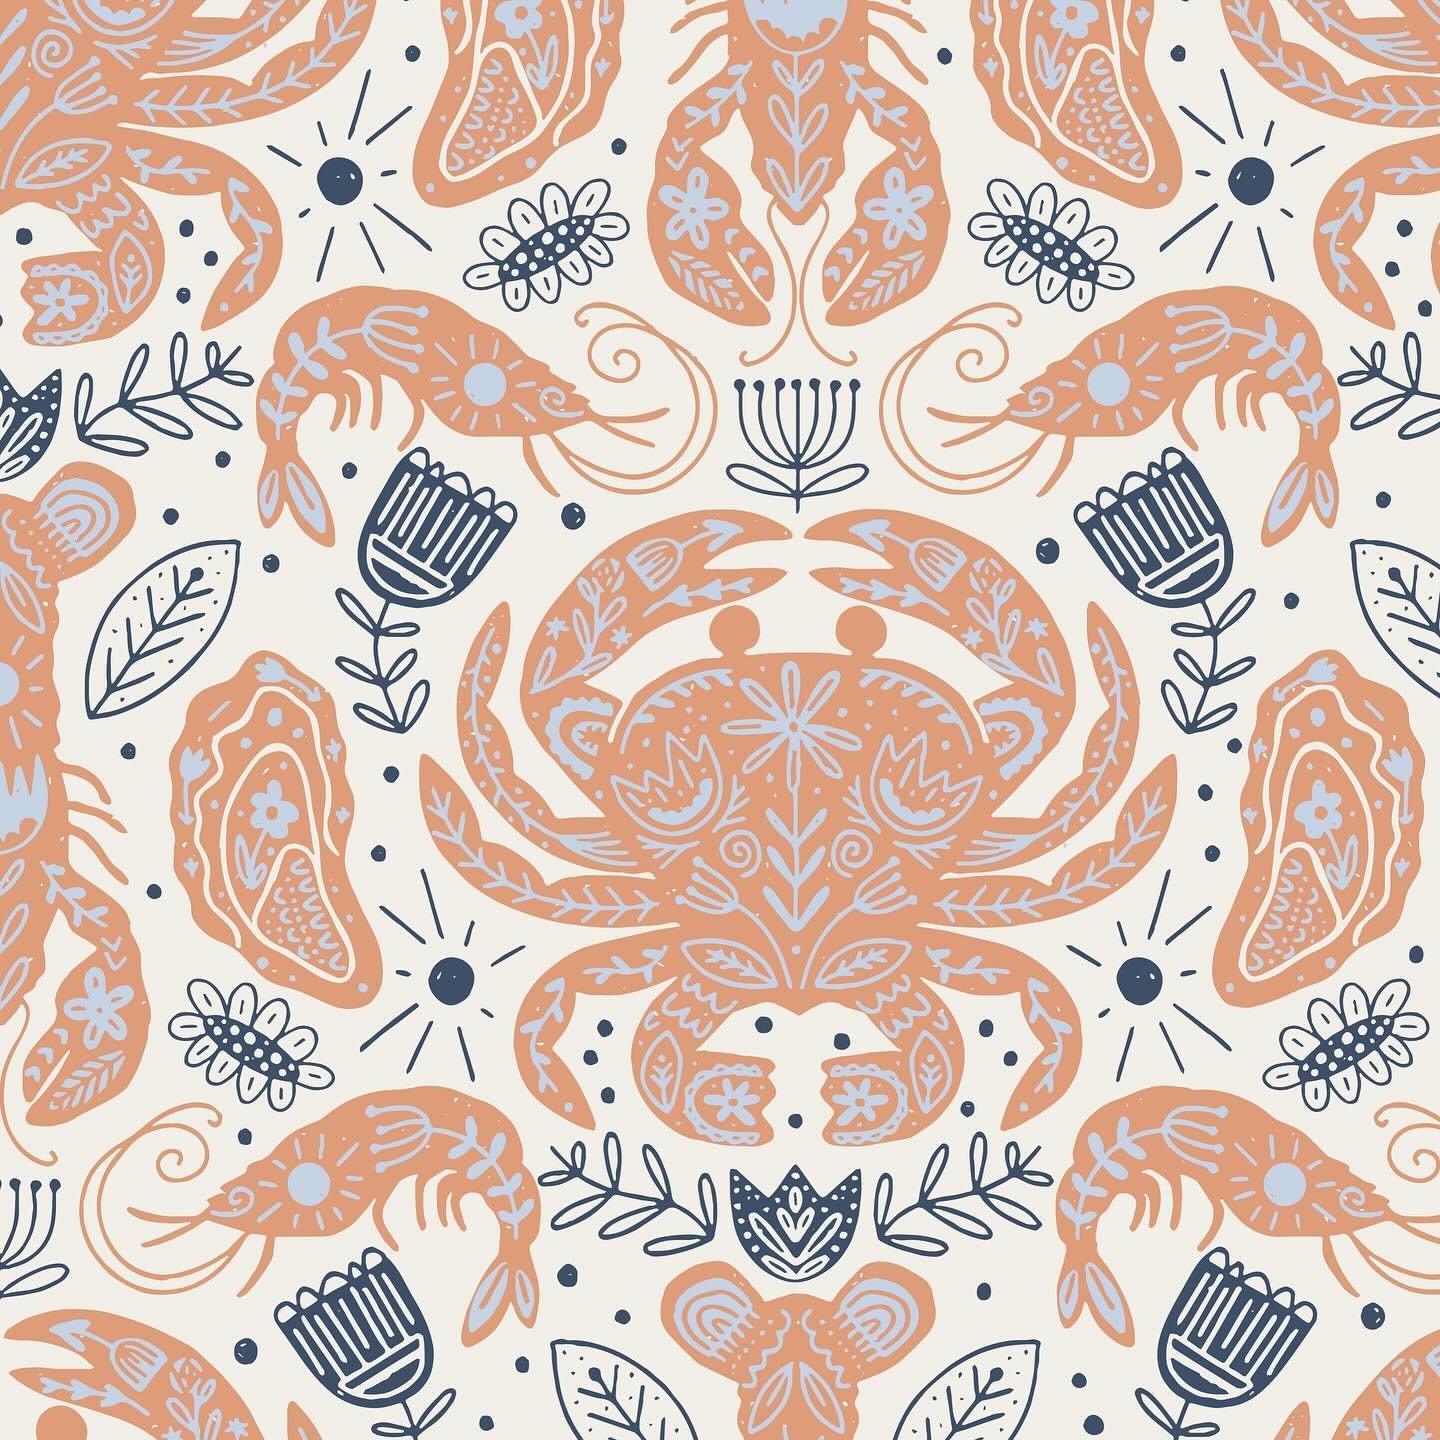 Voting starts tomorrow for @spoonflower&rsquo;s Crustacean Core challenge! This folk inspired print is on trend and ideal for kitchen accessories ~available on @society6 and @spoonflower now!! (Crustacean Core seems to be sticking around, and the pri